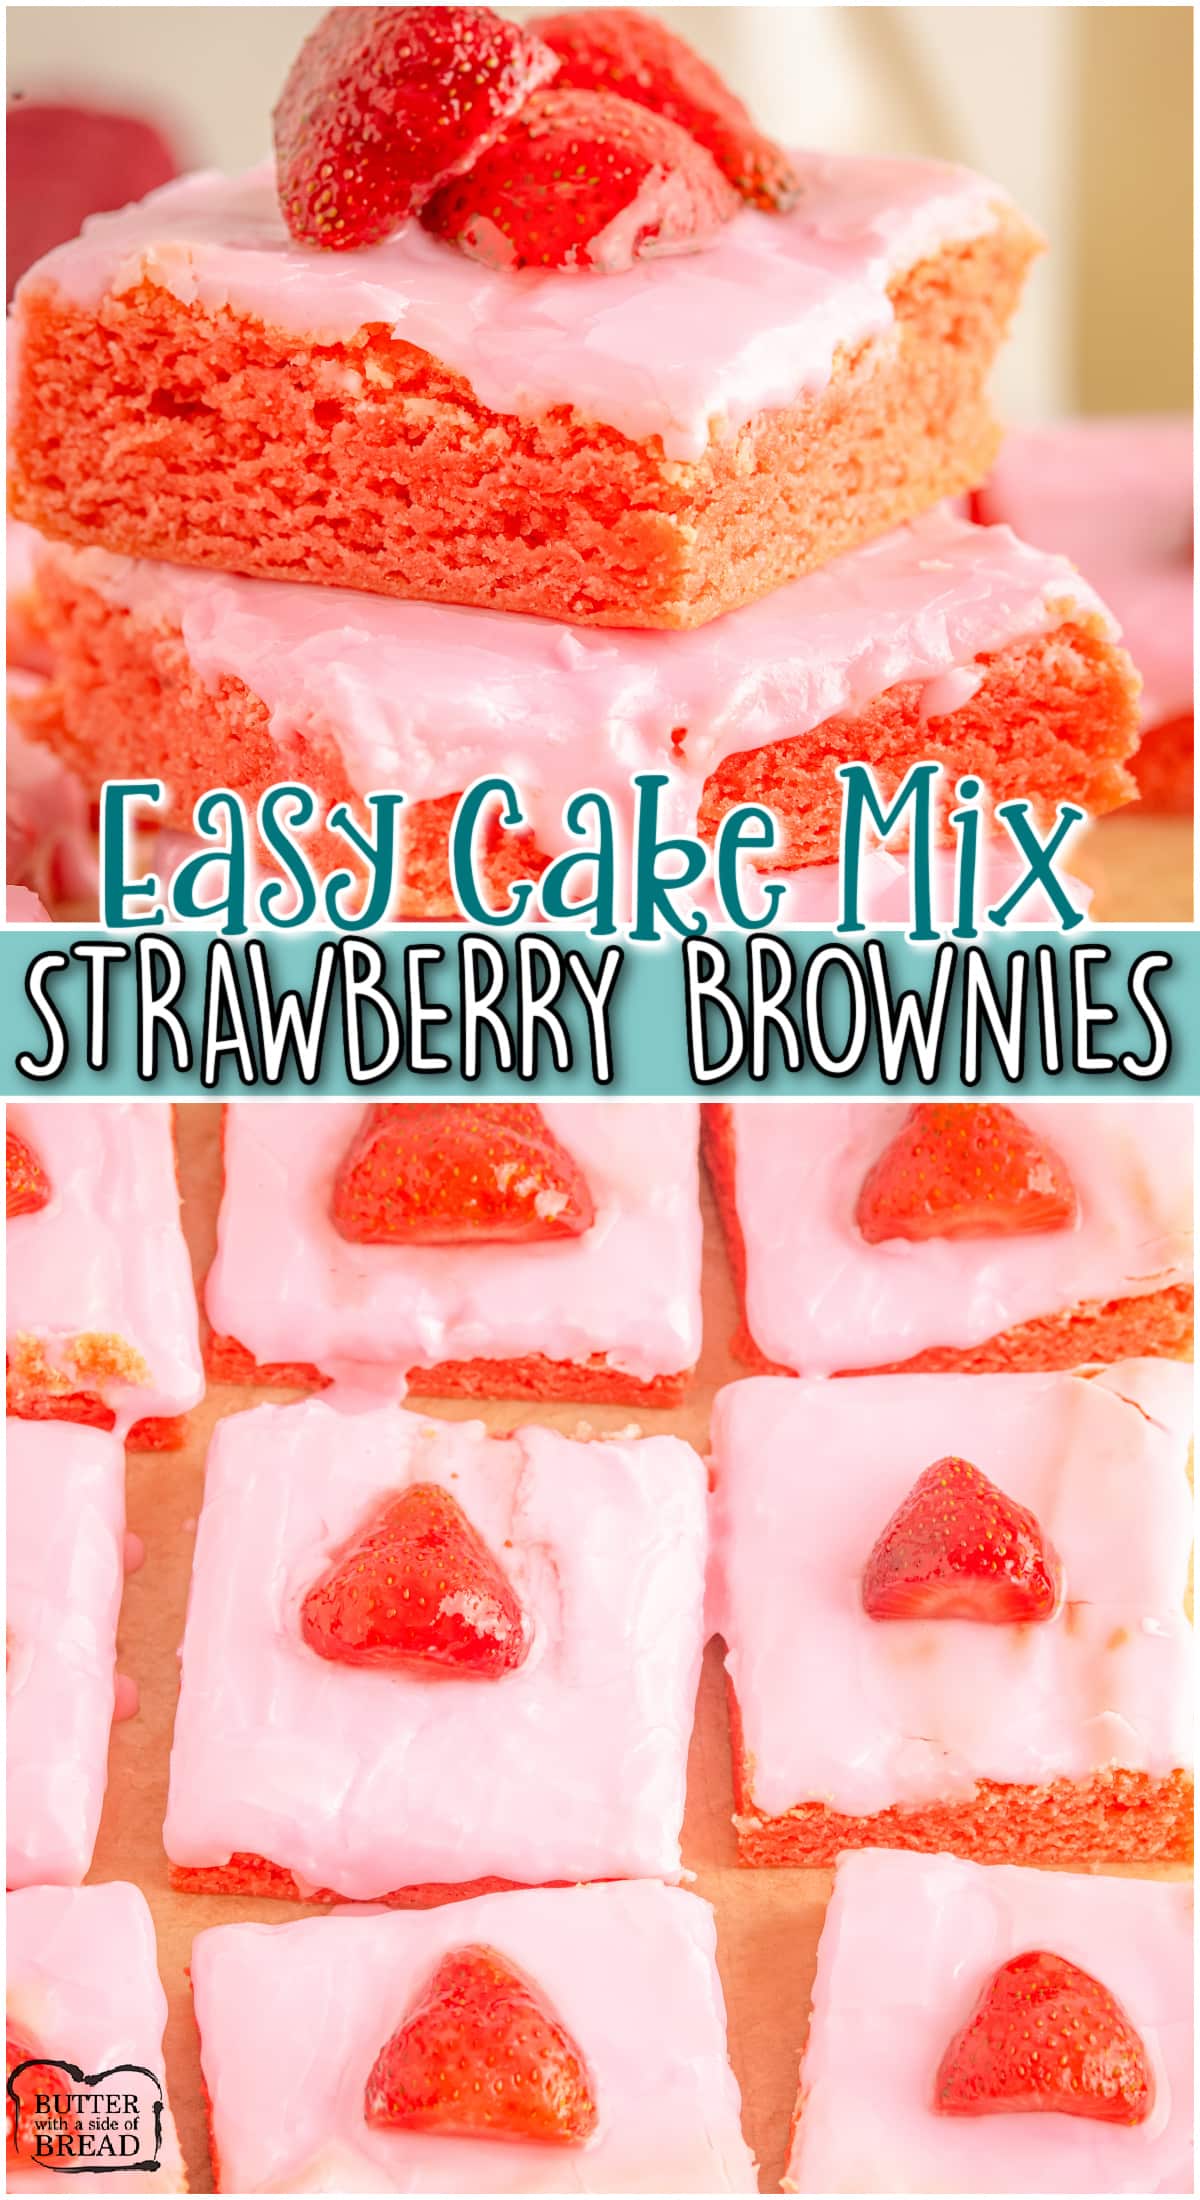 Cake Mix Strawberry Brownies made easy with a handful of simple ingredients! Fantastic strawberry flavor in these fudgy strawberry bars topped with berry icing!